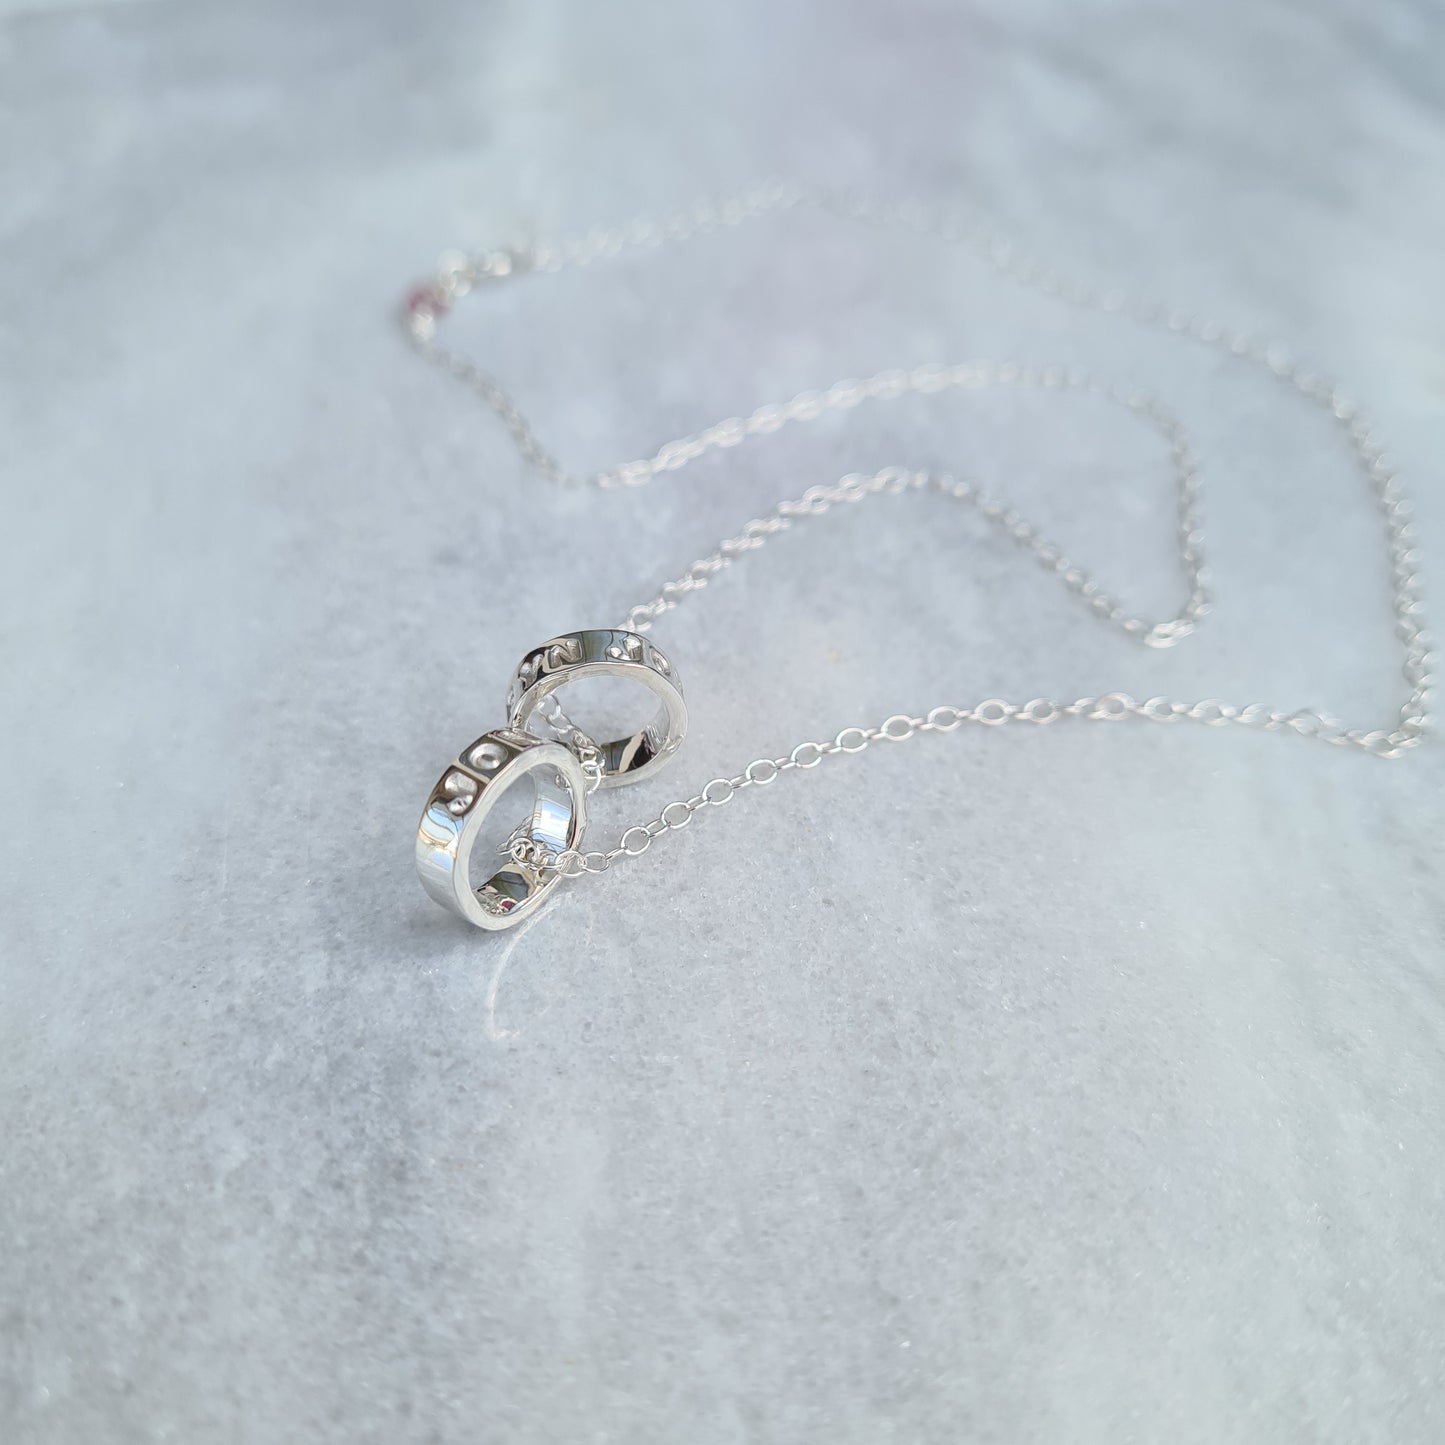 Silver Charms Necklace